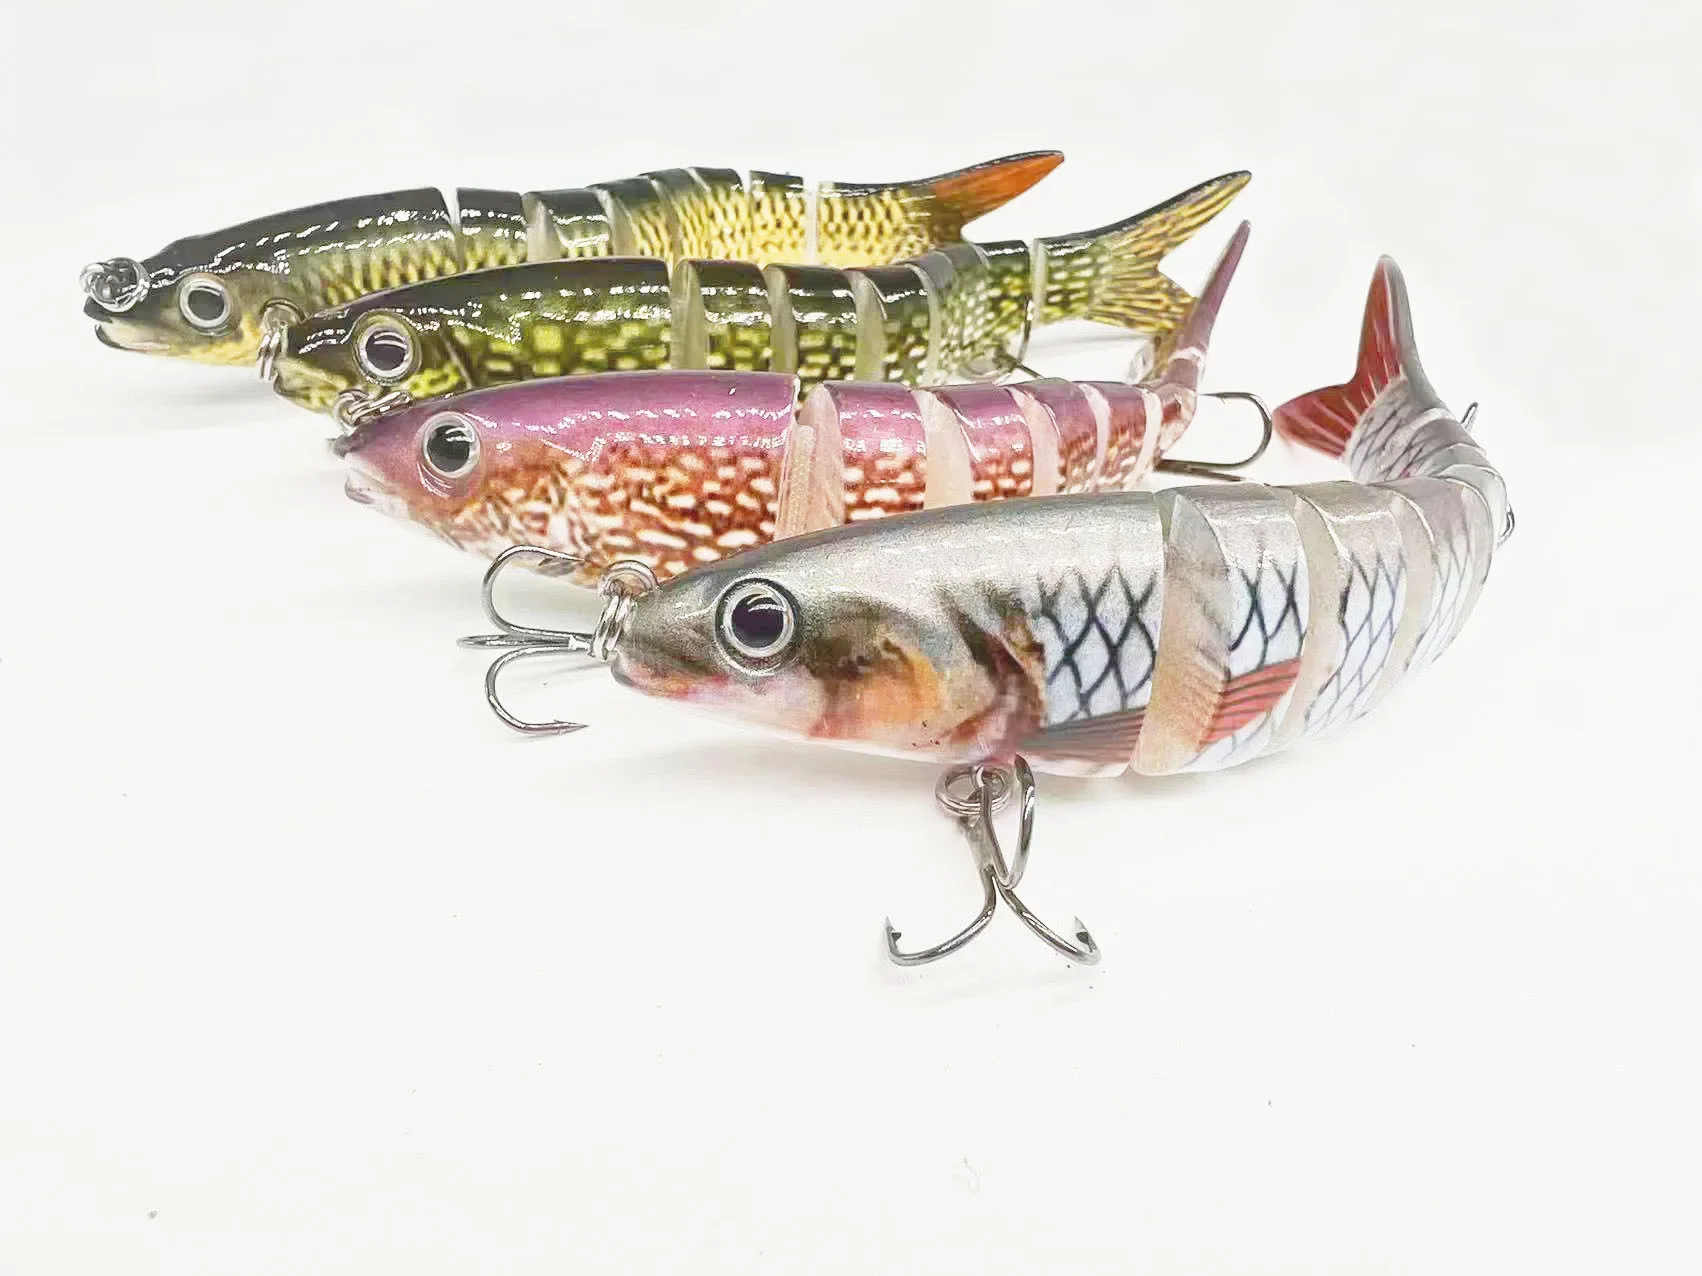 https://ae01.alicdn.com/kf/S31281526c00243b4a158c2aa9a965503F/135mm-19g-Fishing-Lure-Jointed-Sinking-Wobbler-For-Pike-Swimbait-Crankbait-Trout-Bass-Fishing-Accessories-Tackle.jpg